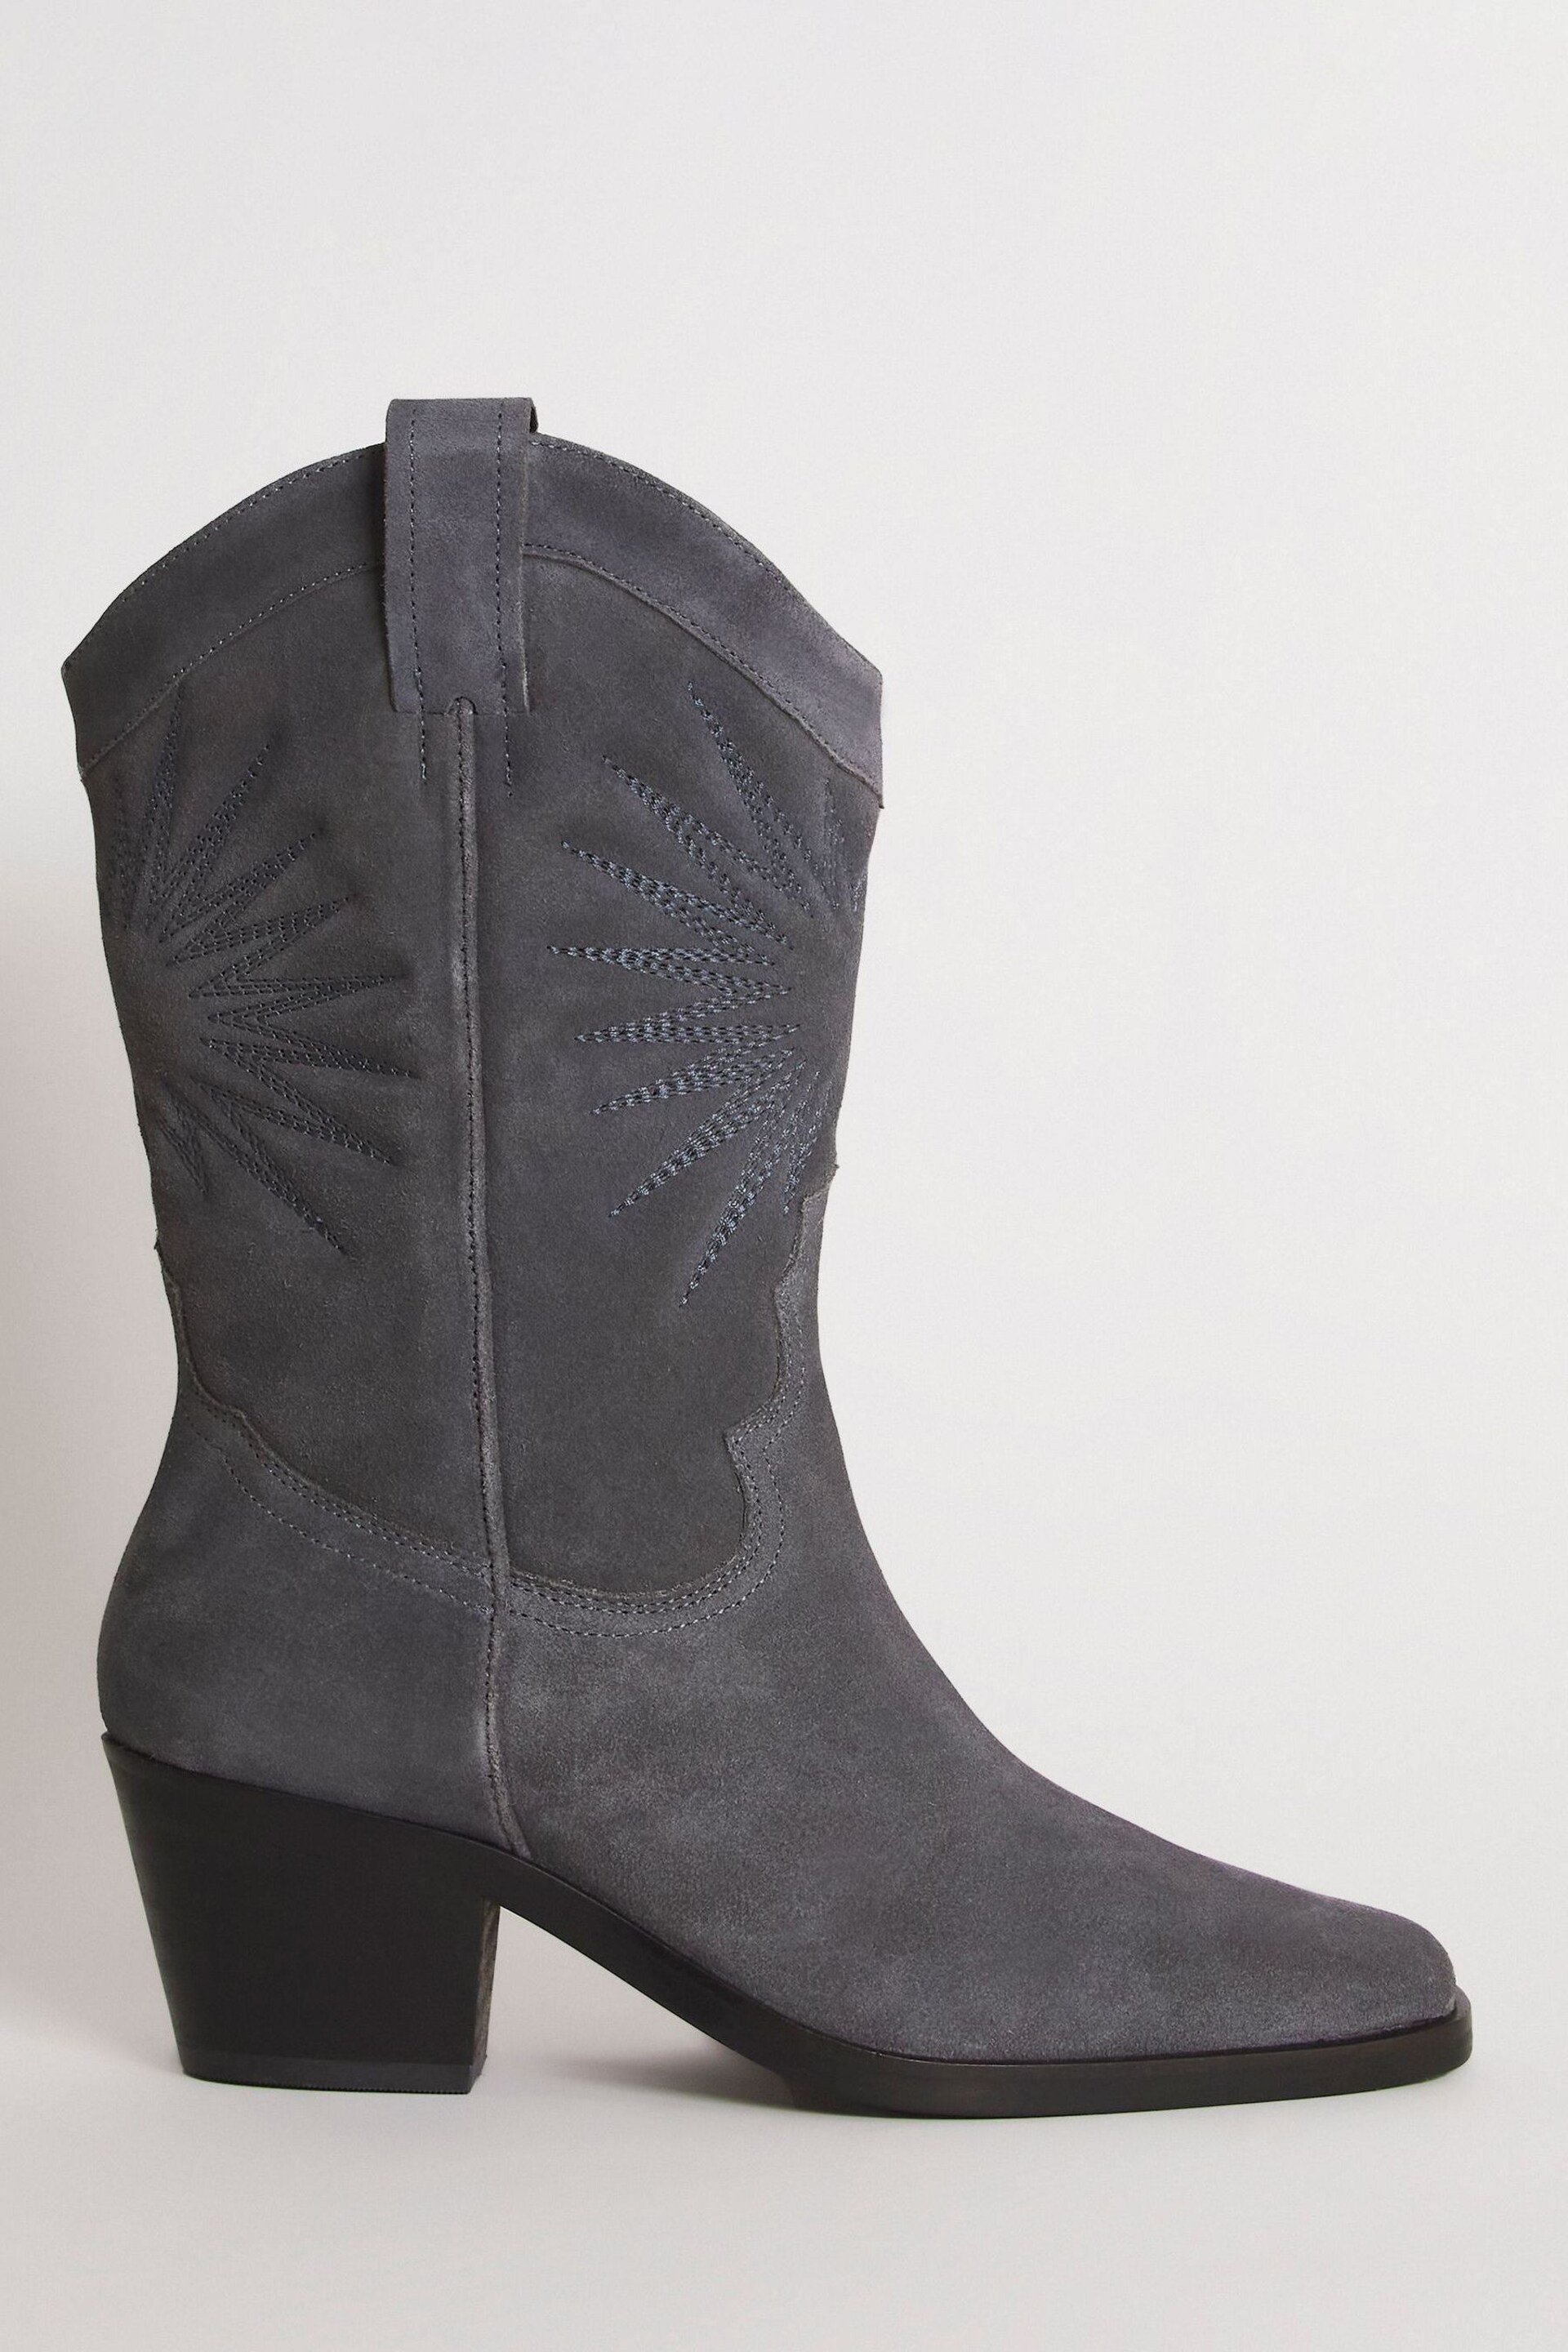 Simply Be Grey Suede Embroidered Western Calf Boots in Wide Fit Standard Calf - Image 1 of 3